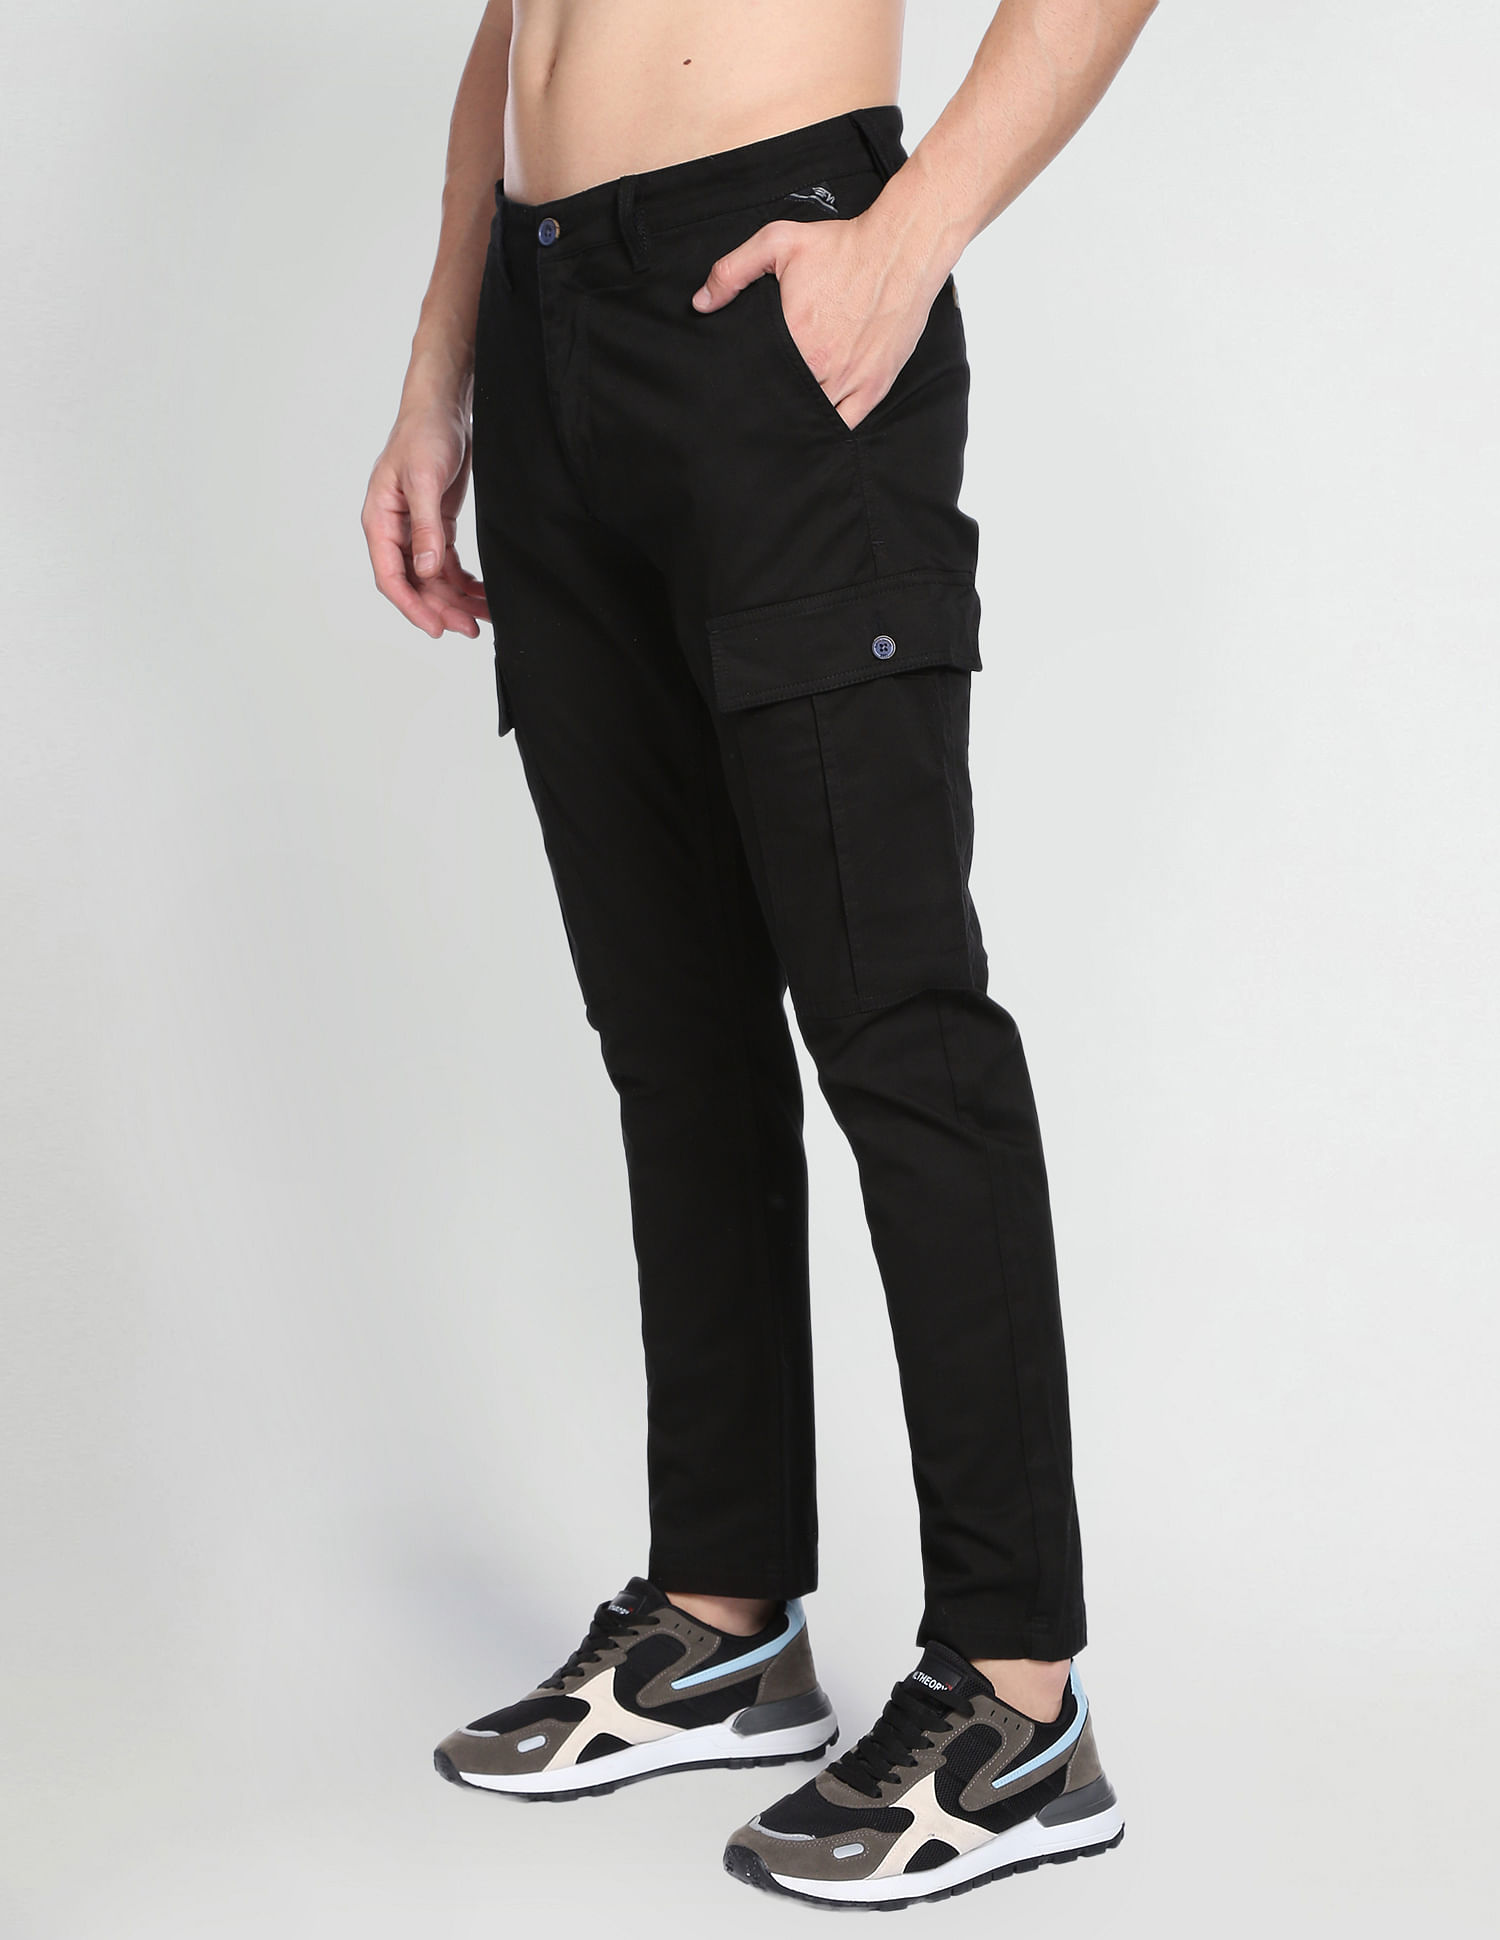 Men's Cargo Pants Cargo Trousers Work Pants Pocket Plain Comfort Breathable  Outdoor Daily Going out 100% Cotton Fashion Casual Black Green 2024 - $40.99